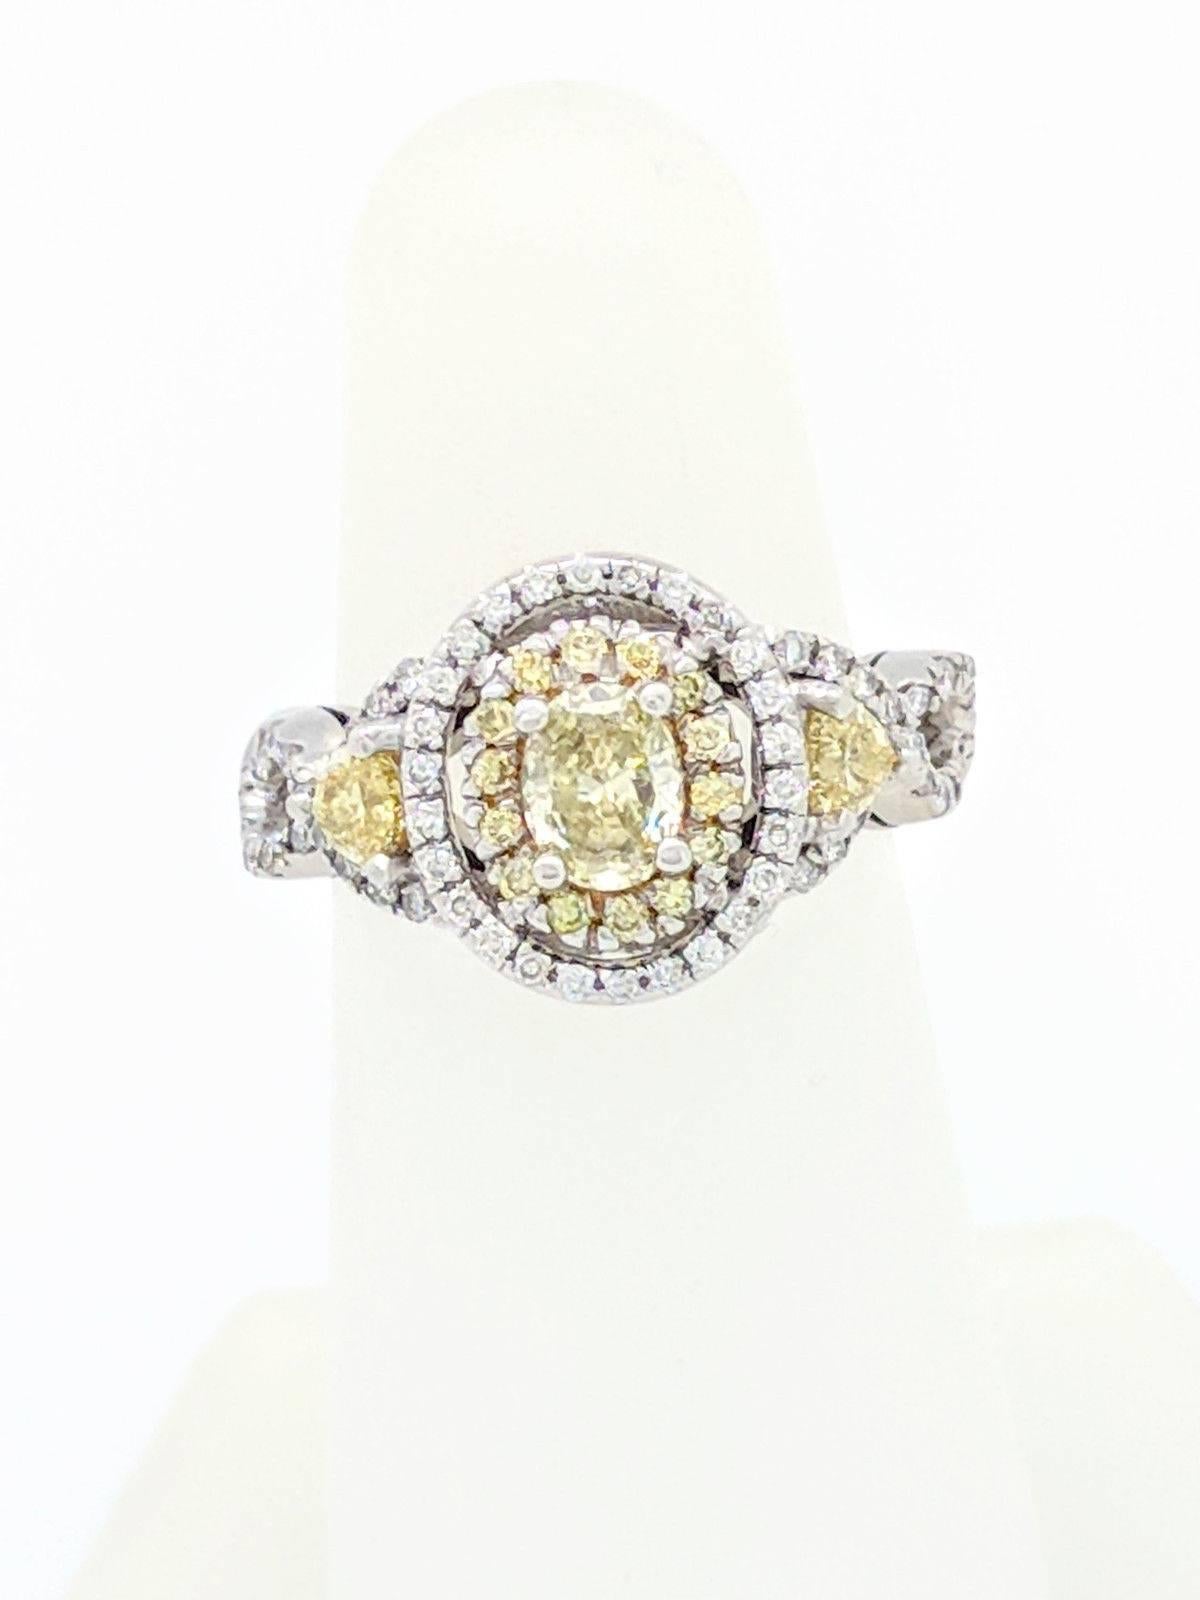 Fancy Yellow & Natural White Diamond Engagement Ring 1.50ctw

You are viewing a Stunning Fancy Yellow & White diamond engagement ring. The center fancy yellow .40ct oval diamond is beautifully displayed in a 14kwg 4-prong halo engagement setting